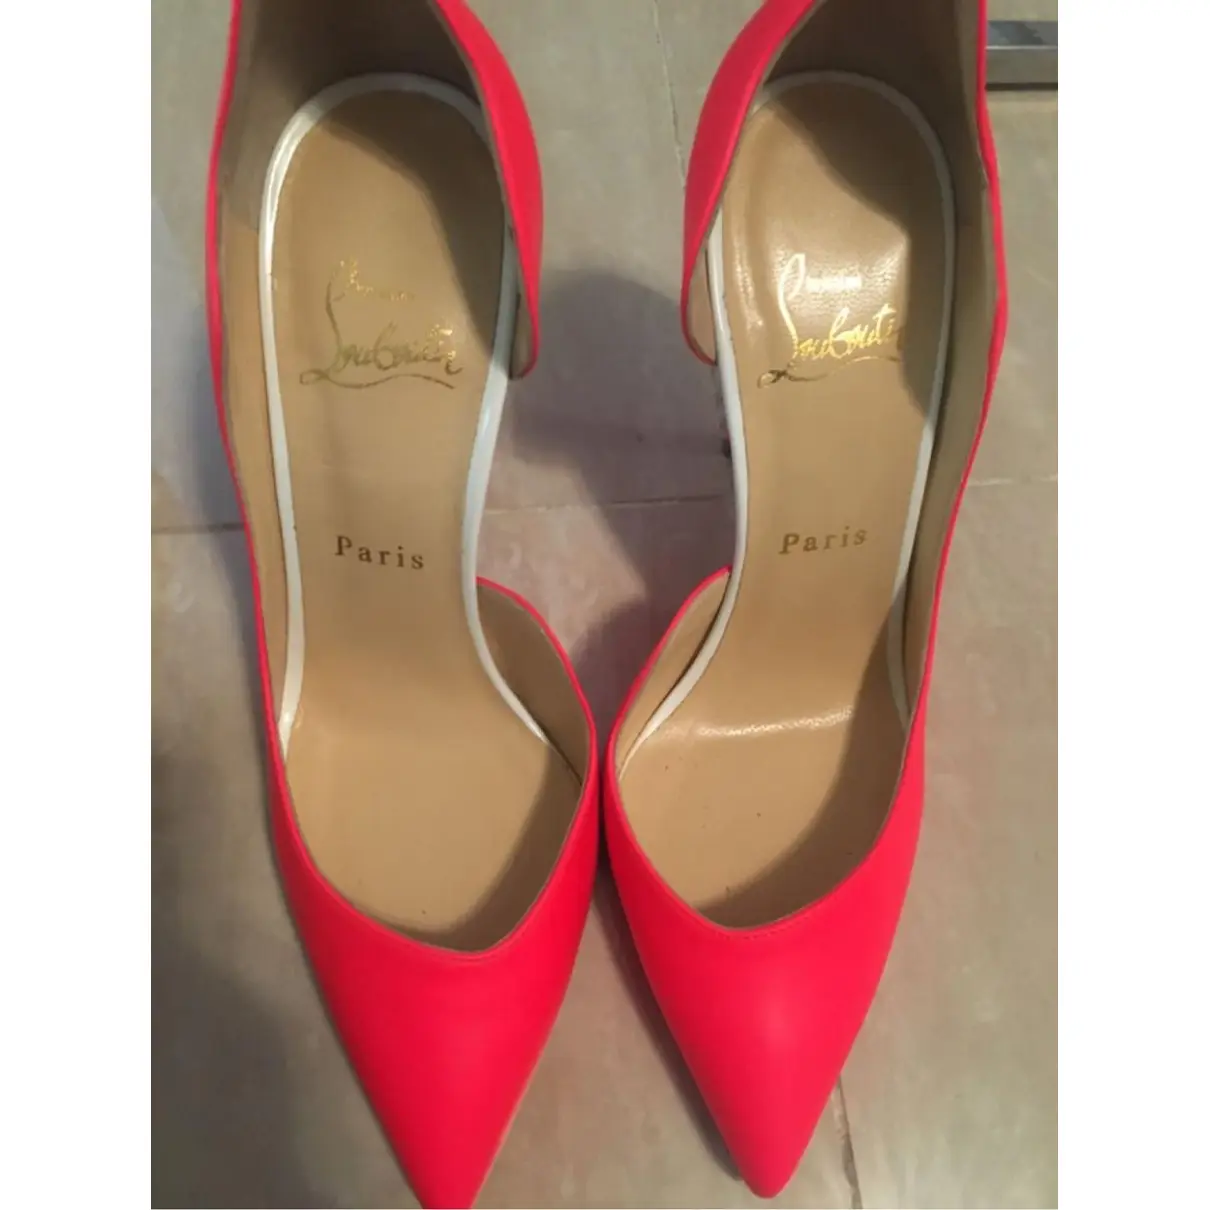 Buy Christian Louboutin So Kate leather heels online